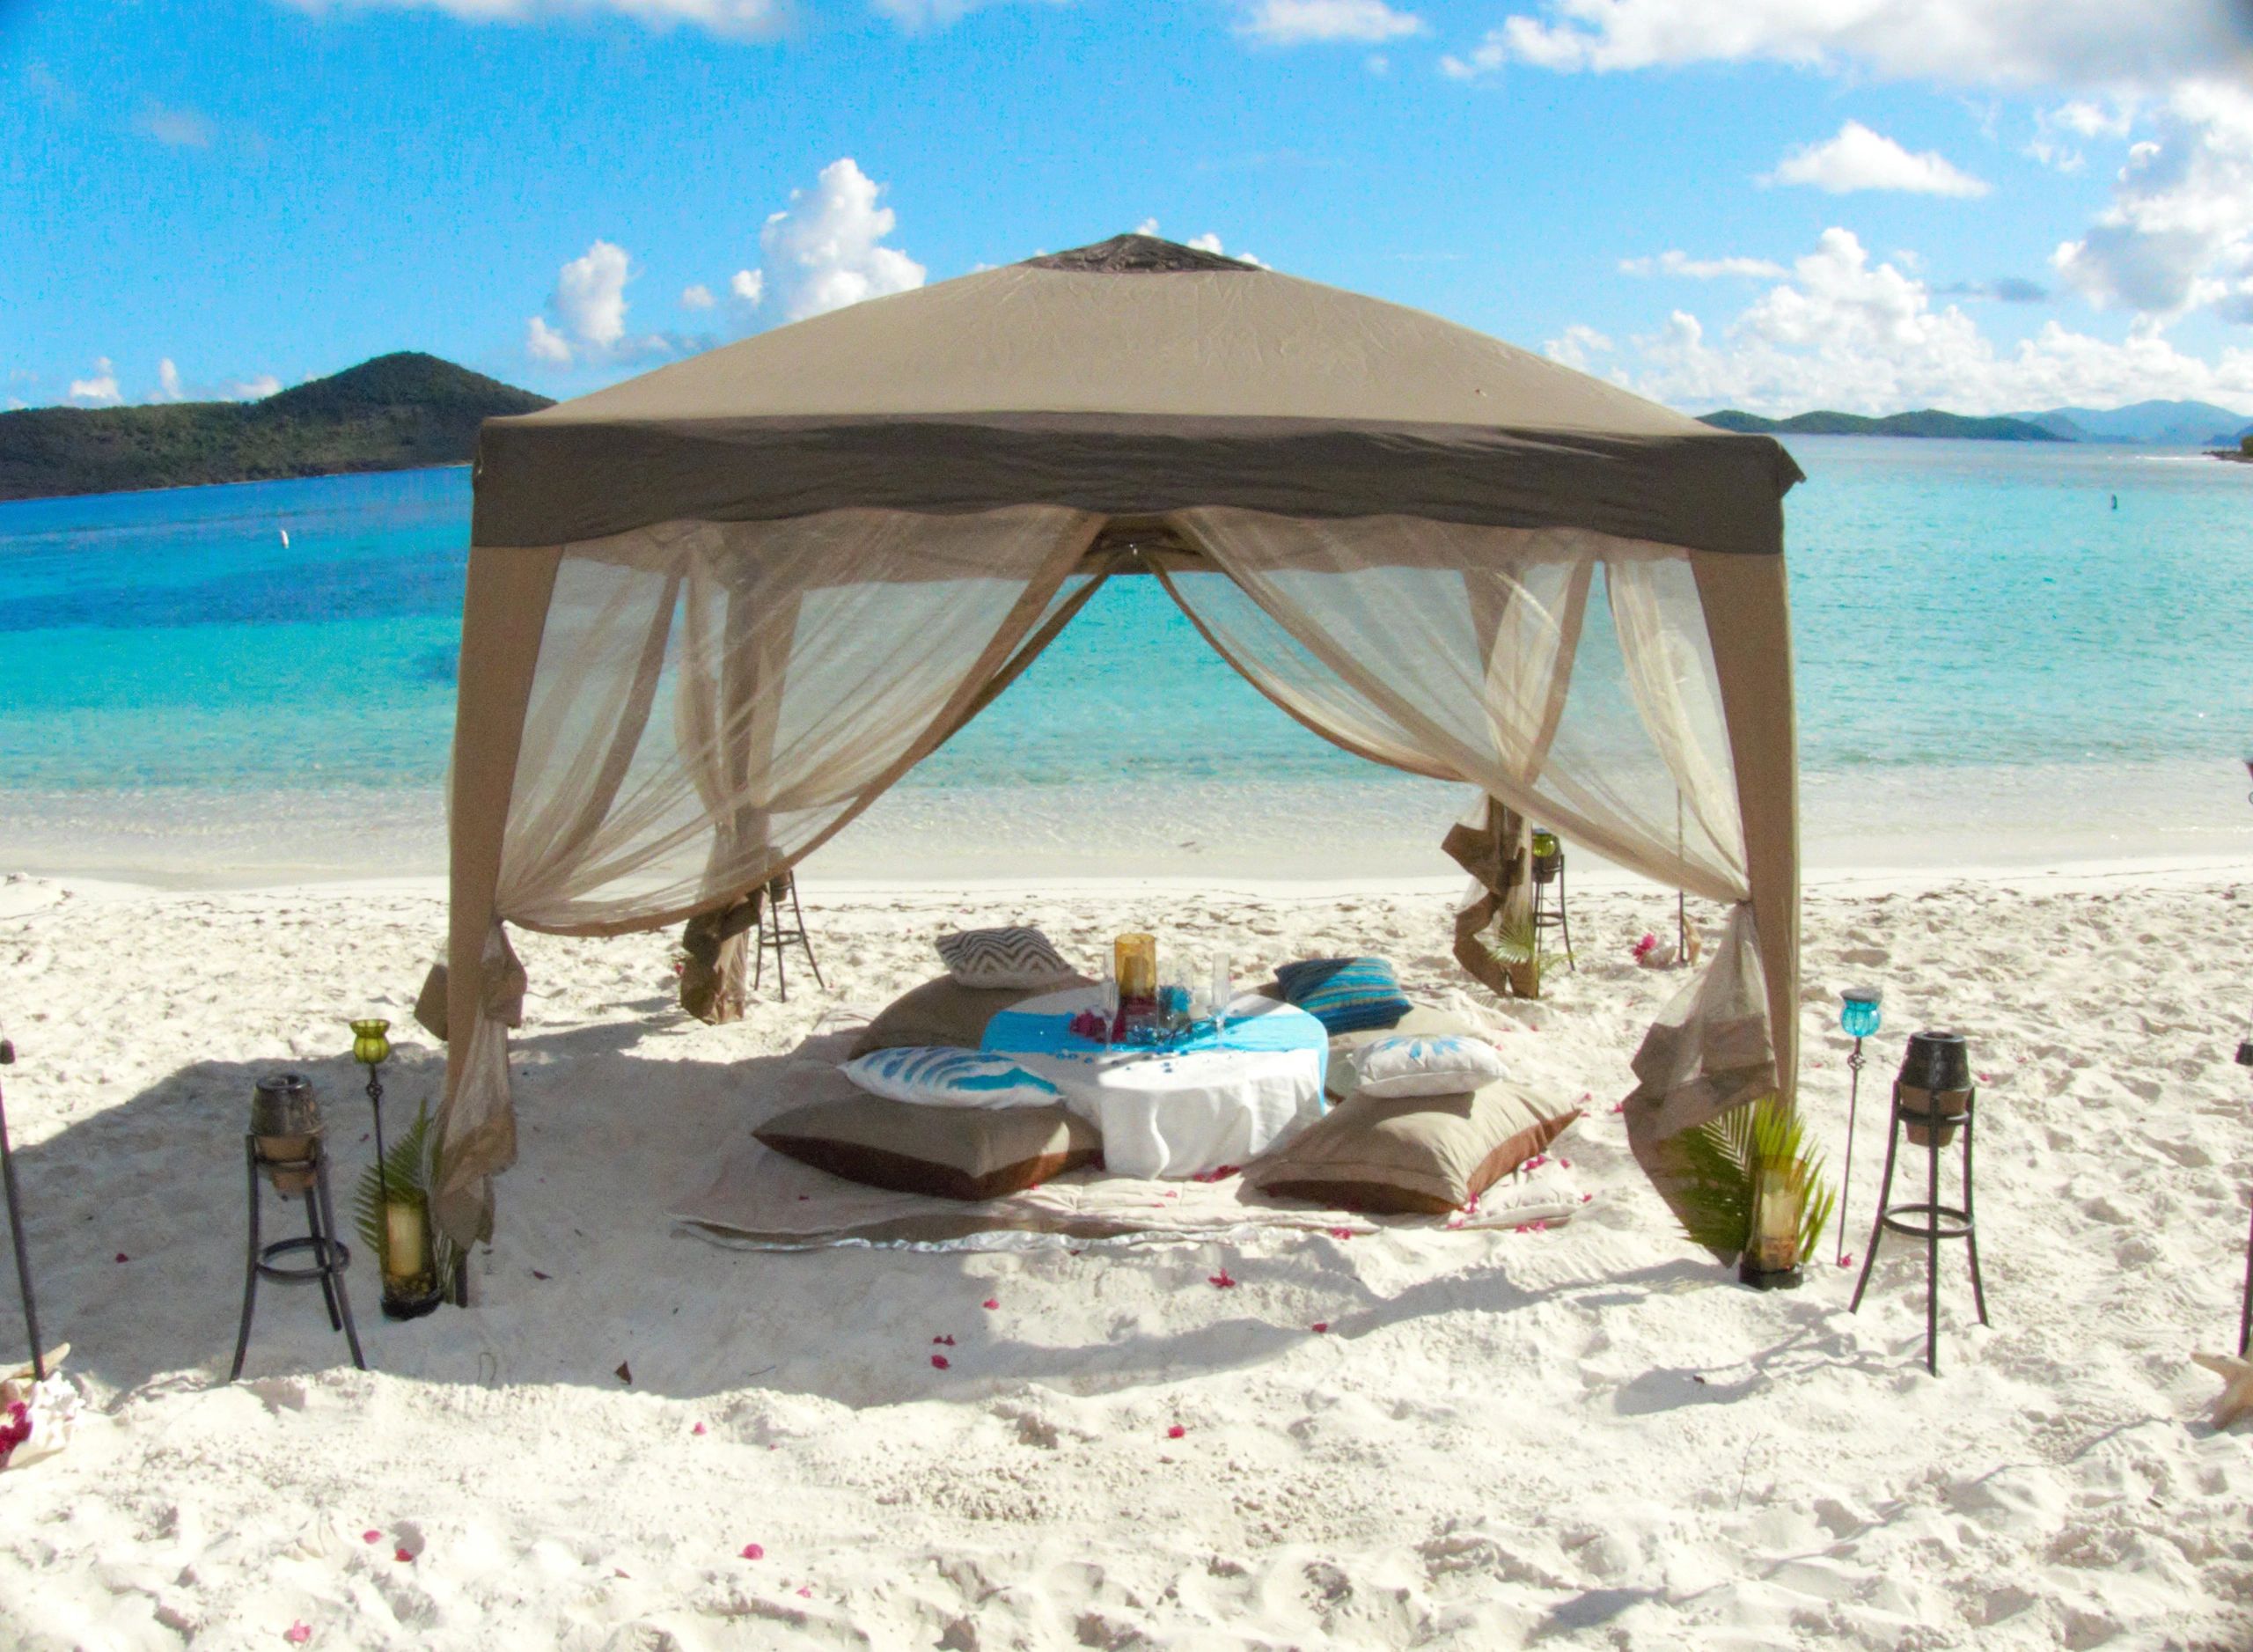 Wedding proposal, picnic beach cabana.  Revel in the moment and take it all in.